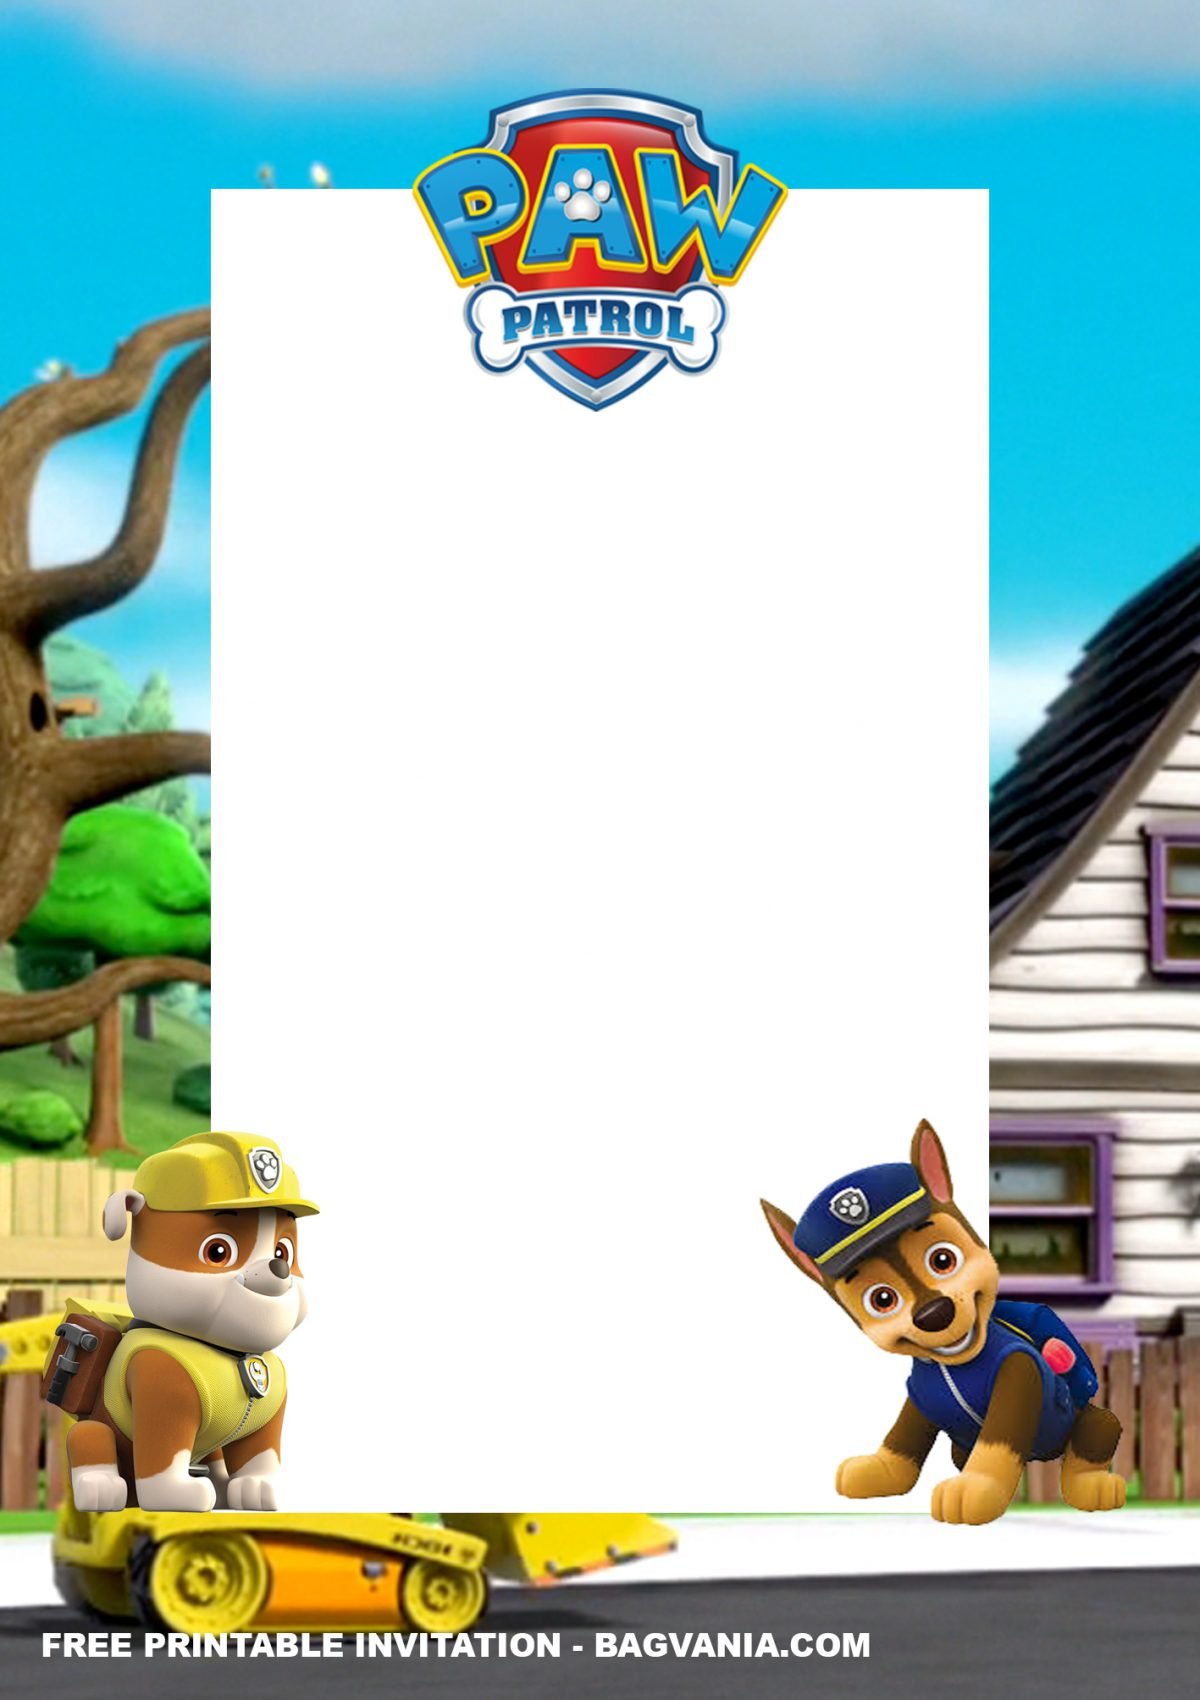 Free Printable Mighty PAW Patrol Birthday Invitation Templates With Portrait Design and Trees